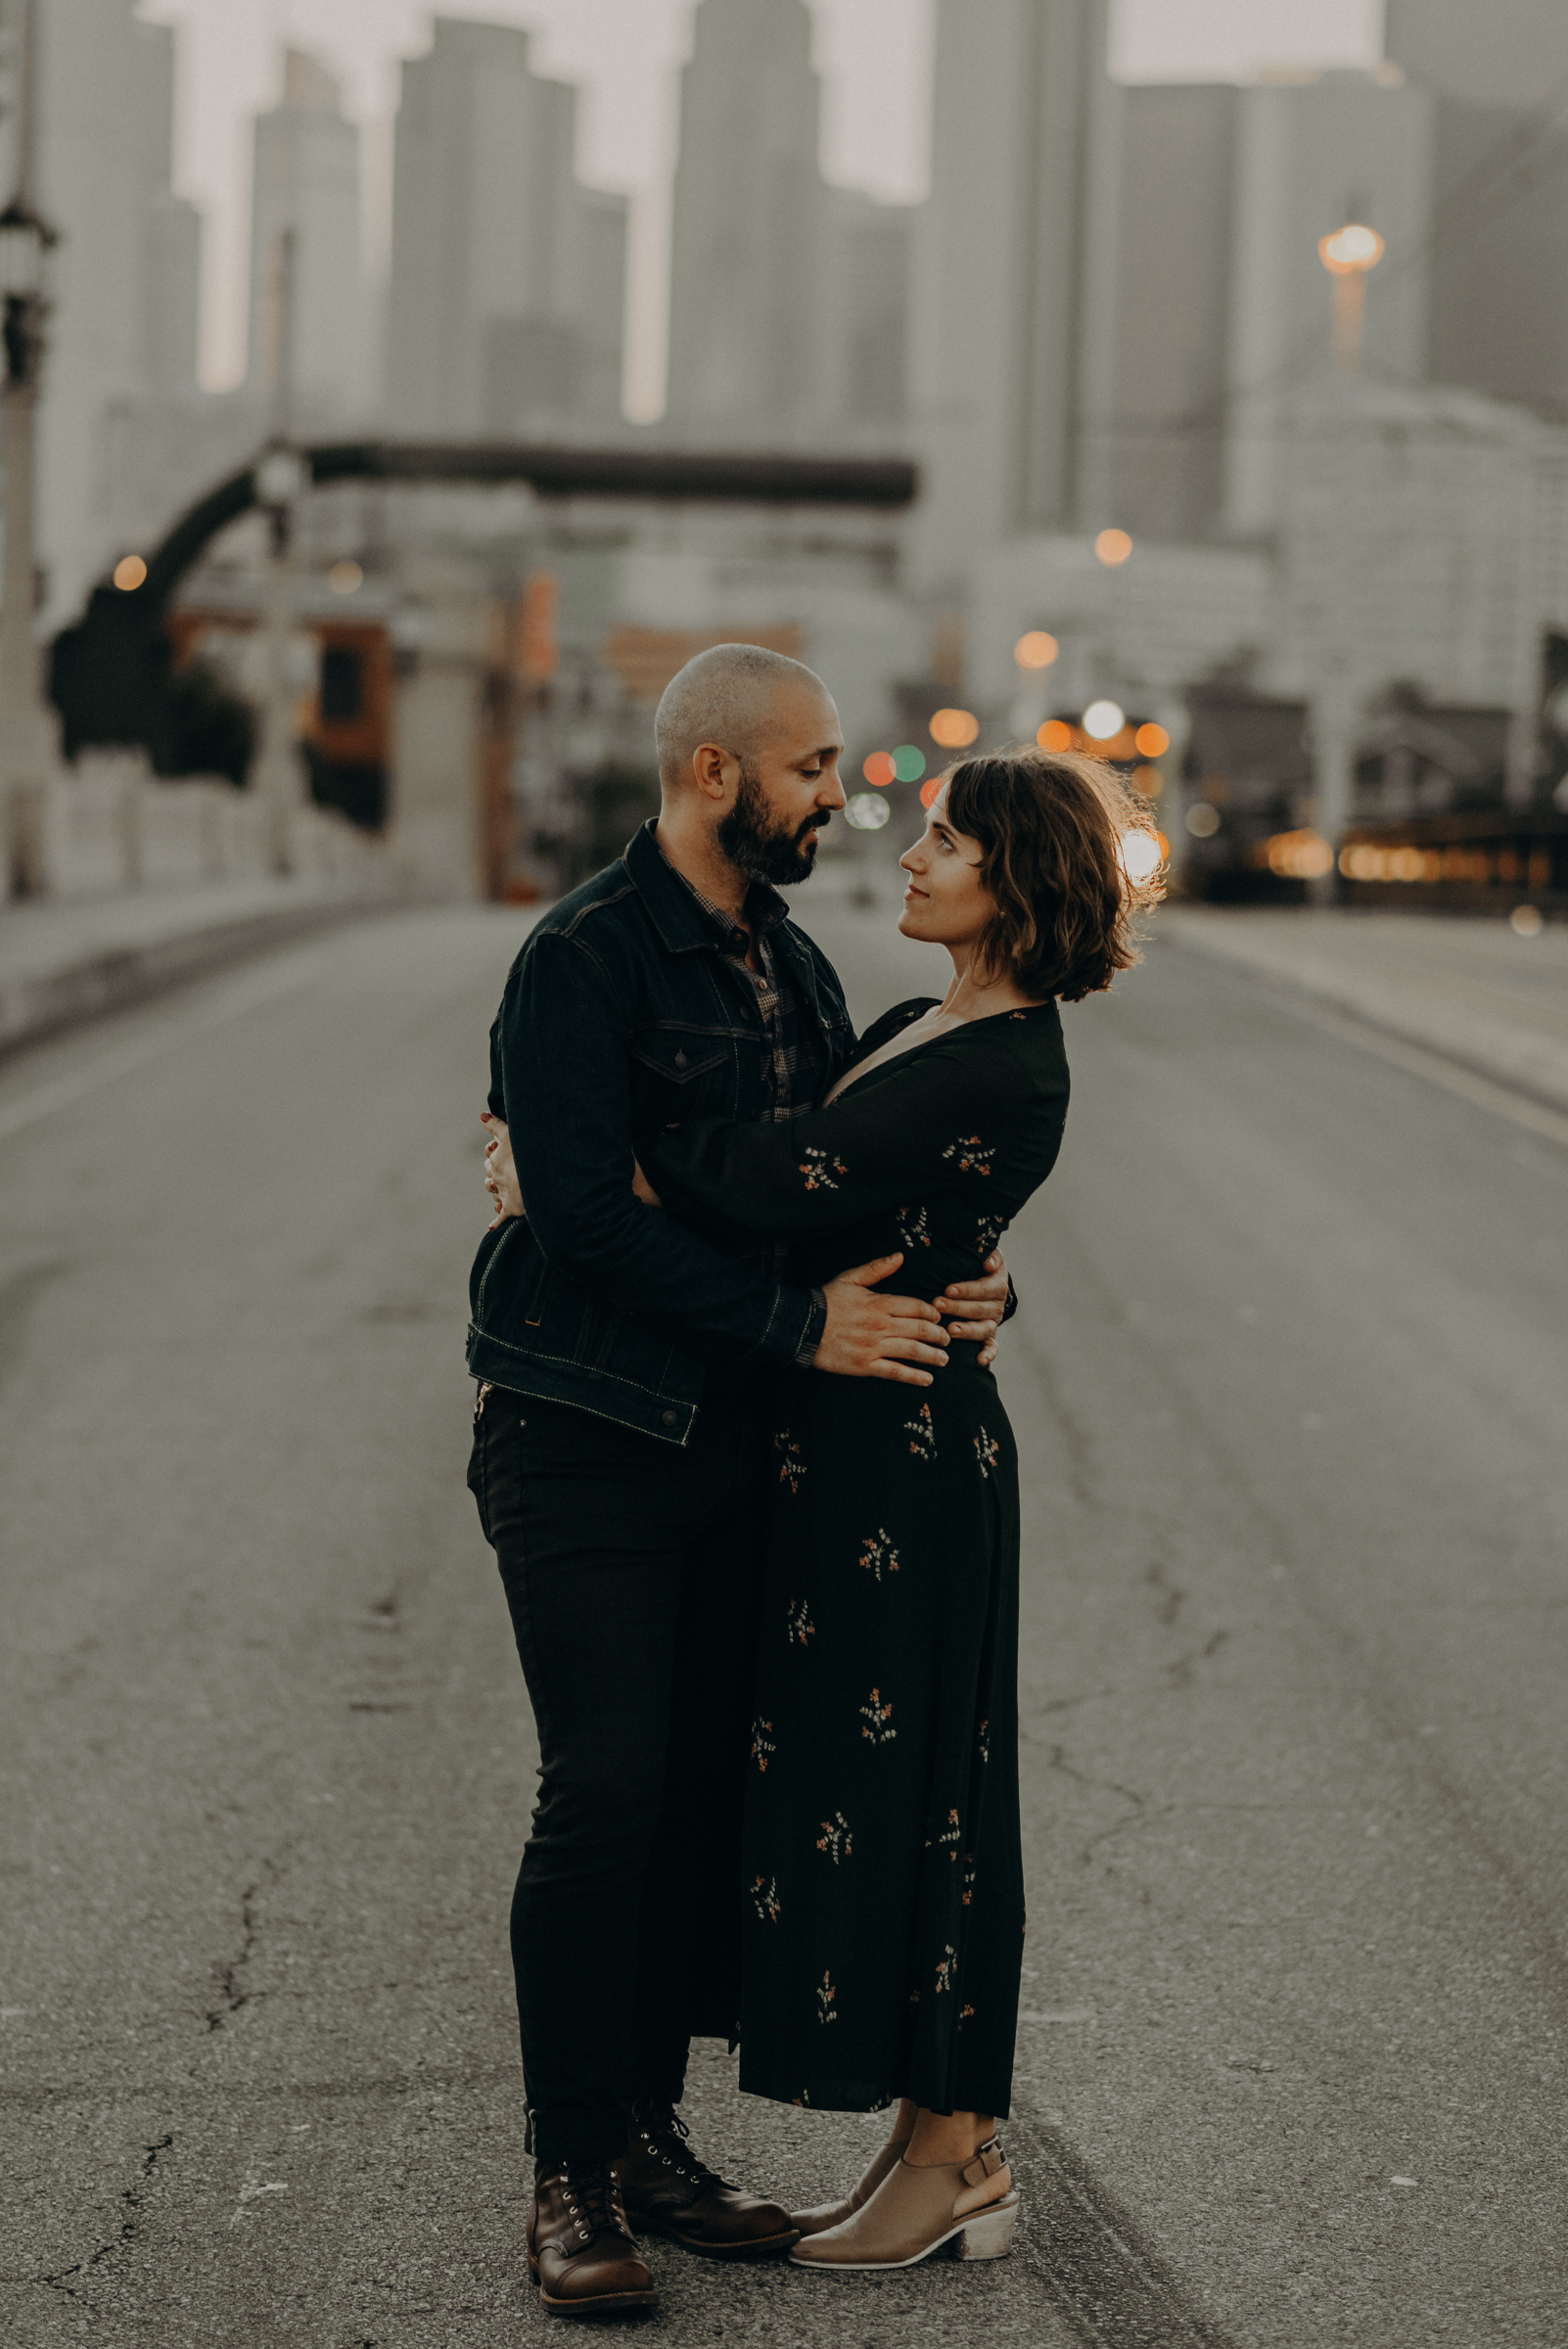 Isaiah + Taylor Photography - Downtown Los Angeles Arts District Engagement35.jpg